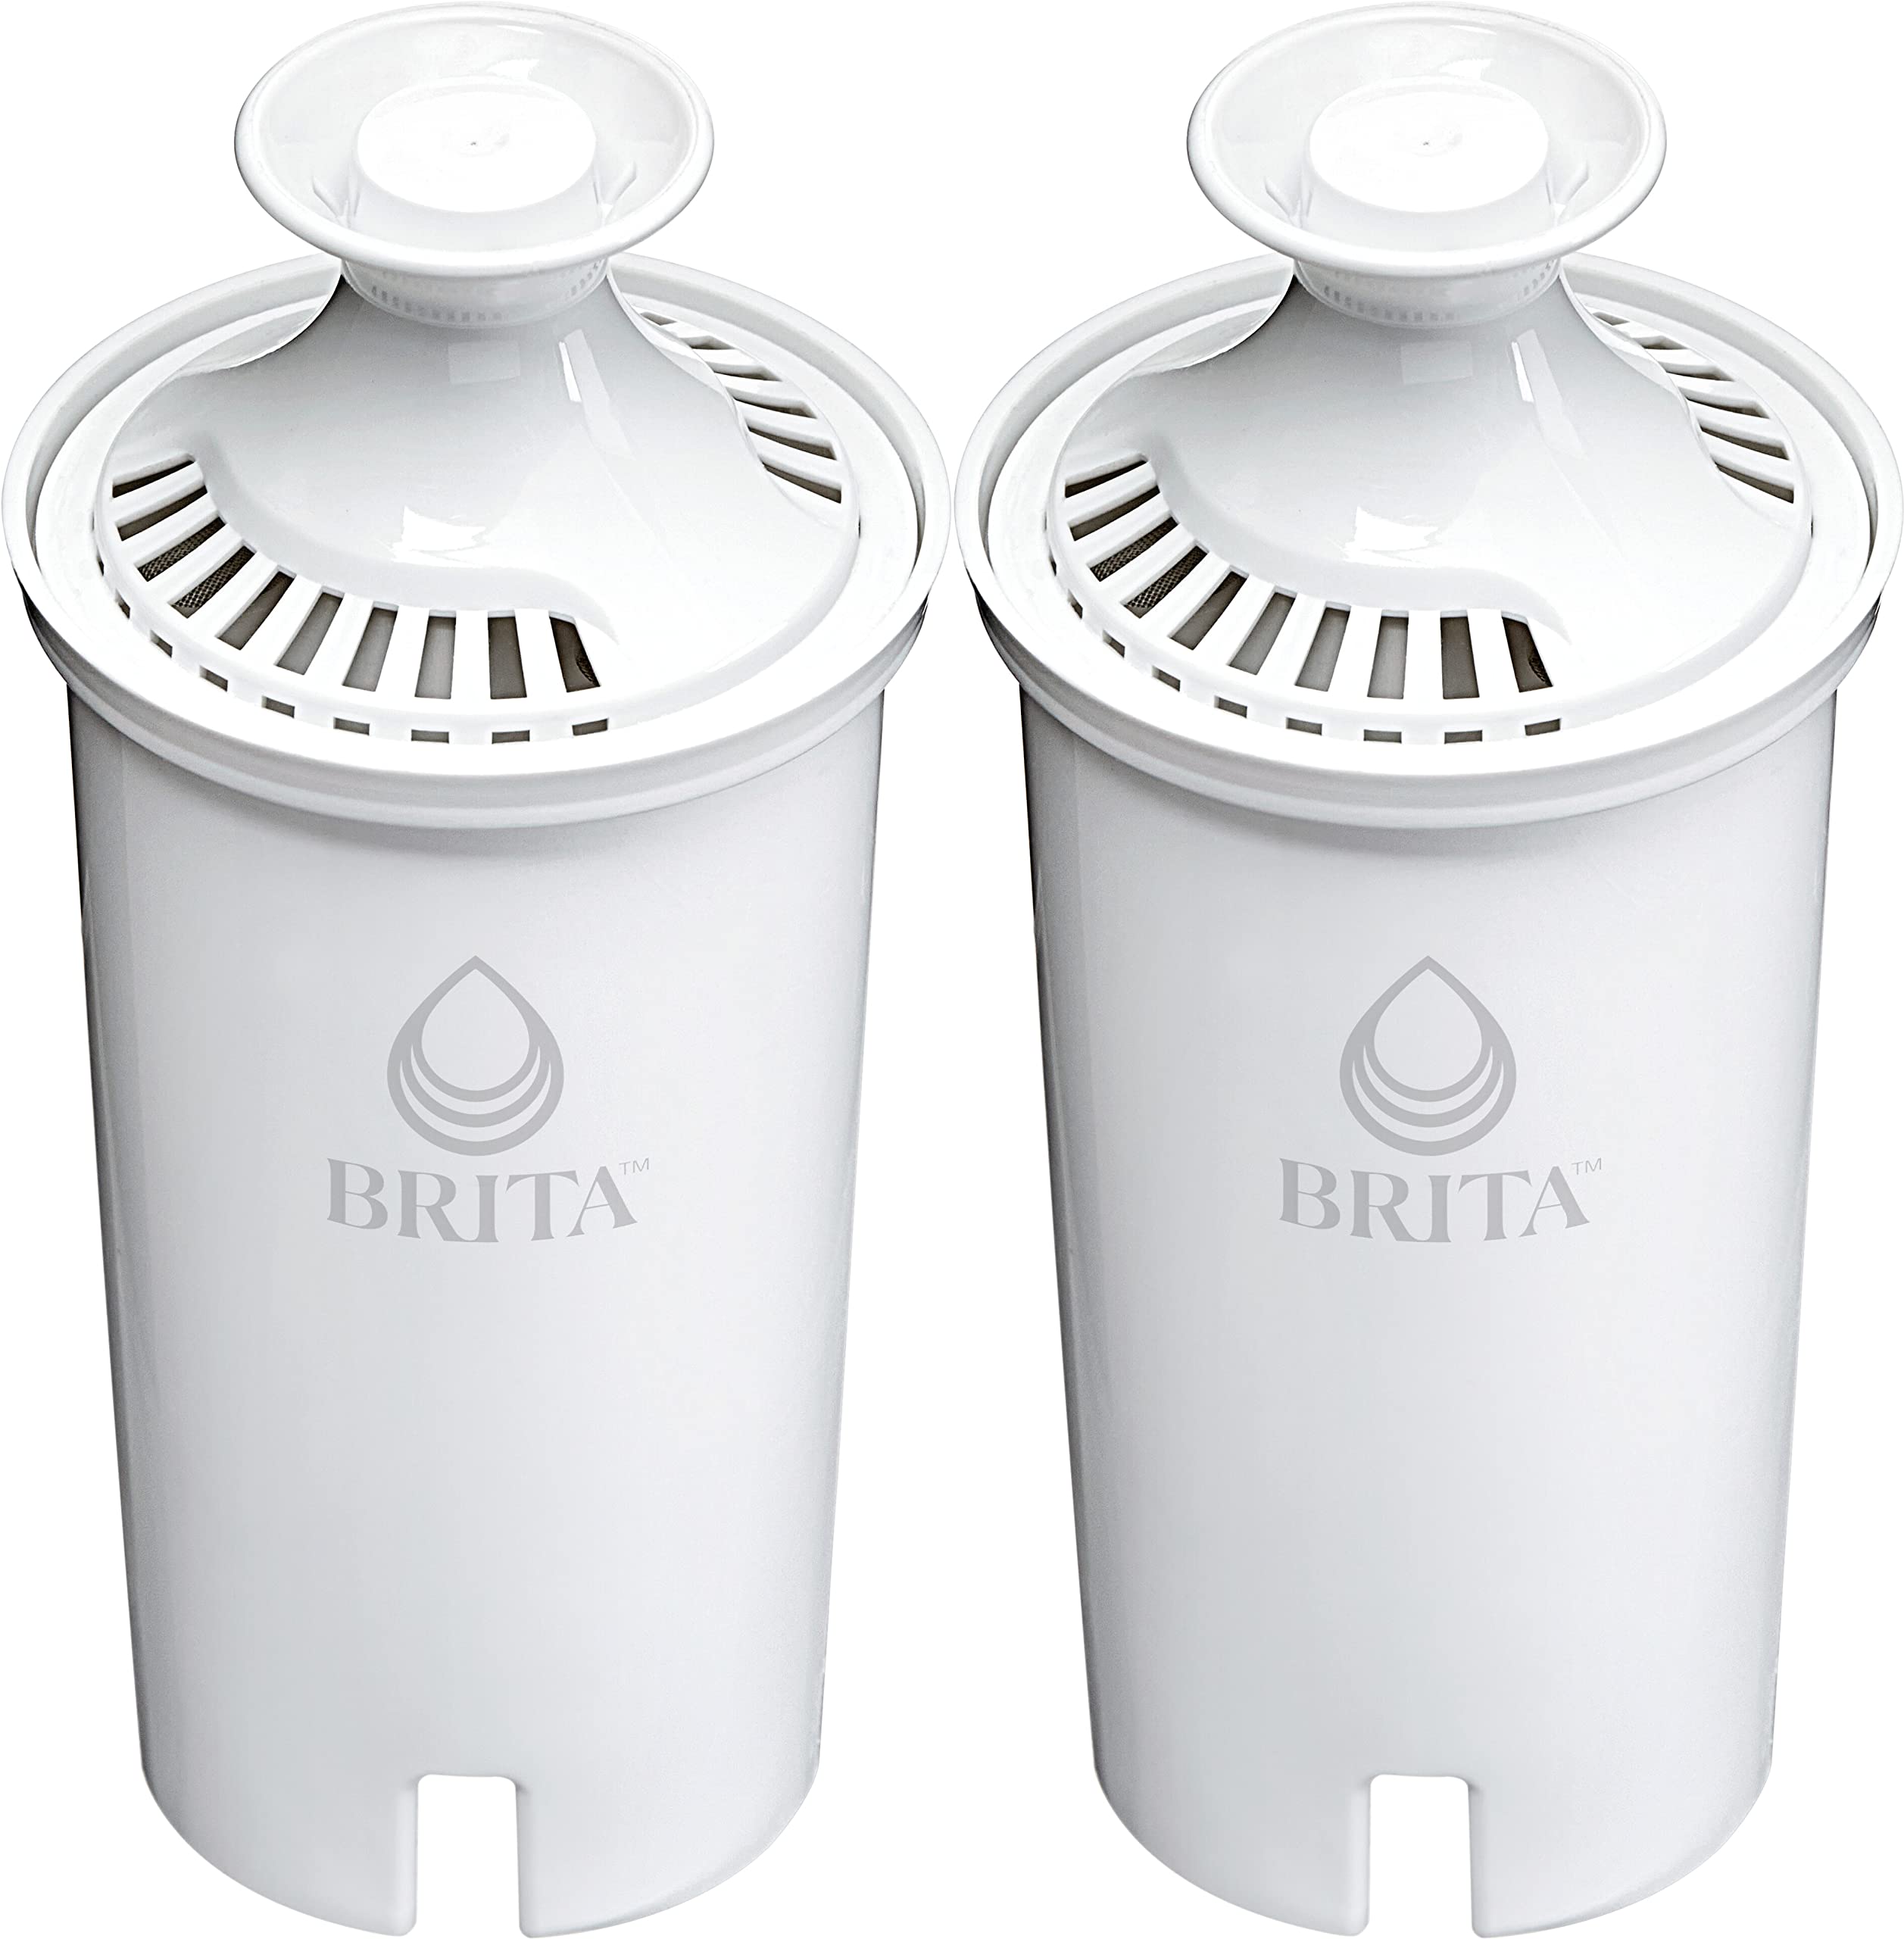 Brita Standard Water Filter Replacements for Pitchers and Dispensers, Lasts 2 Months, Reduces Chlorine Taste and Odor, 2 Count